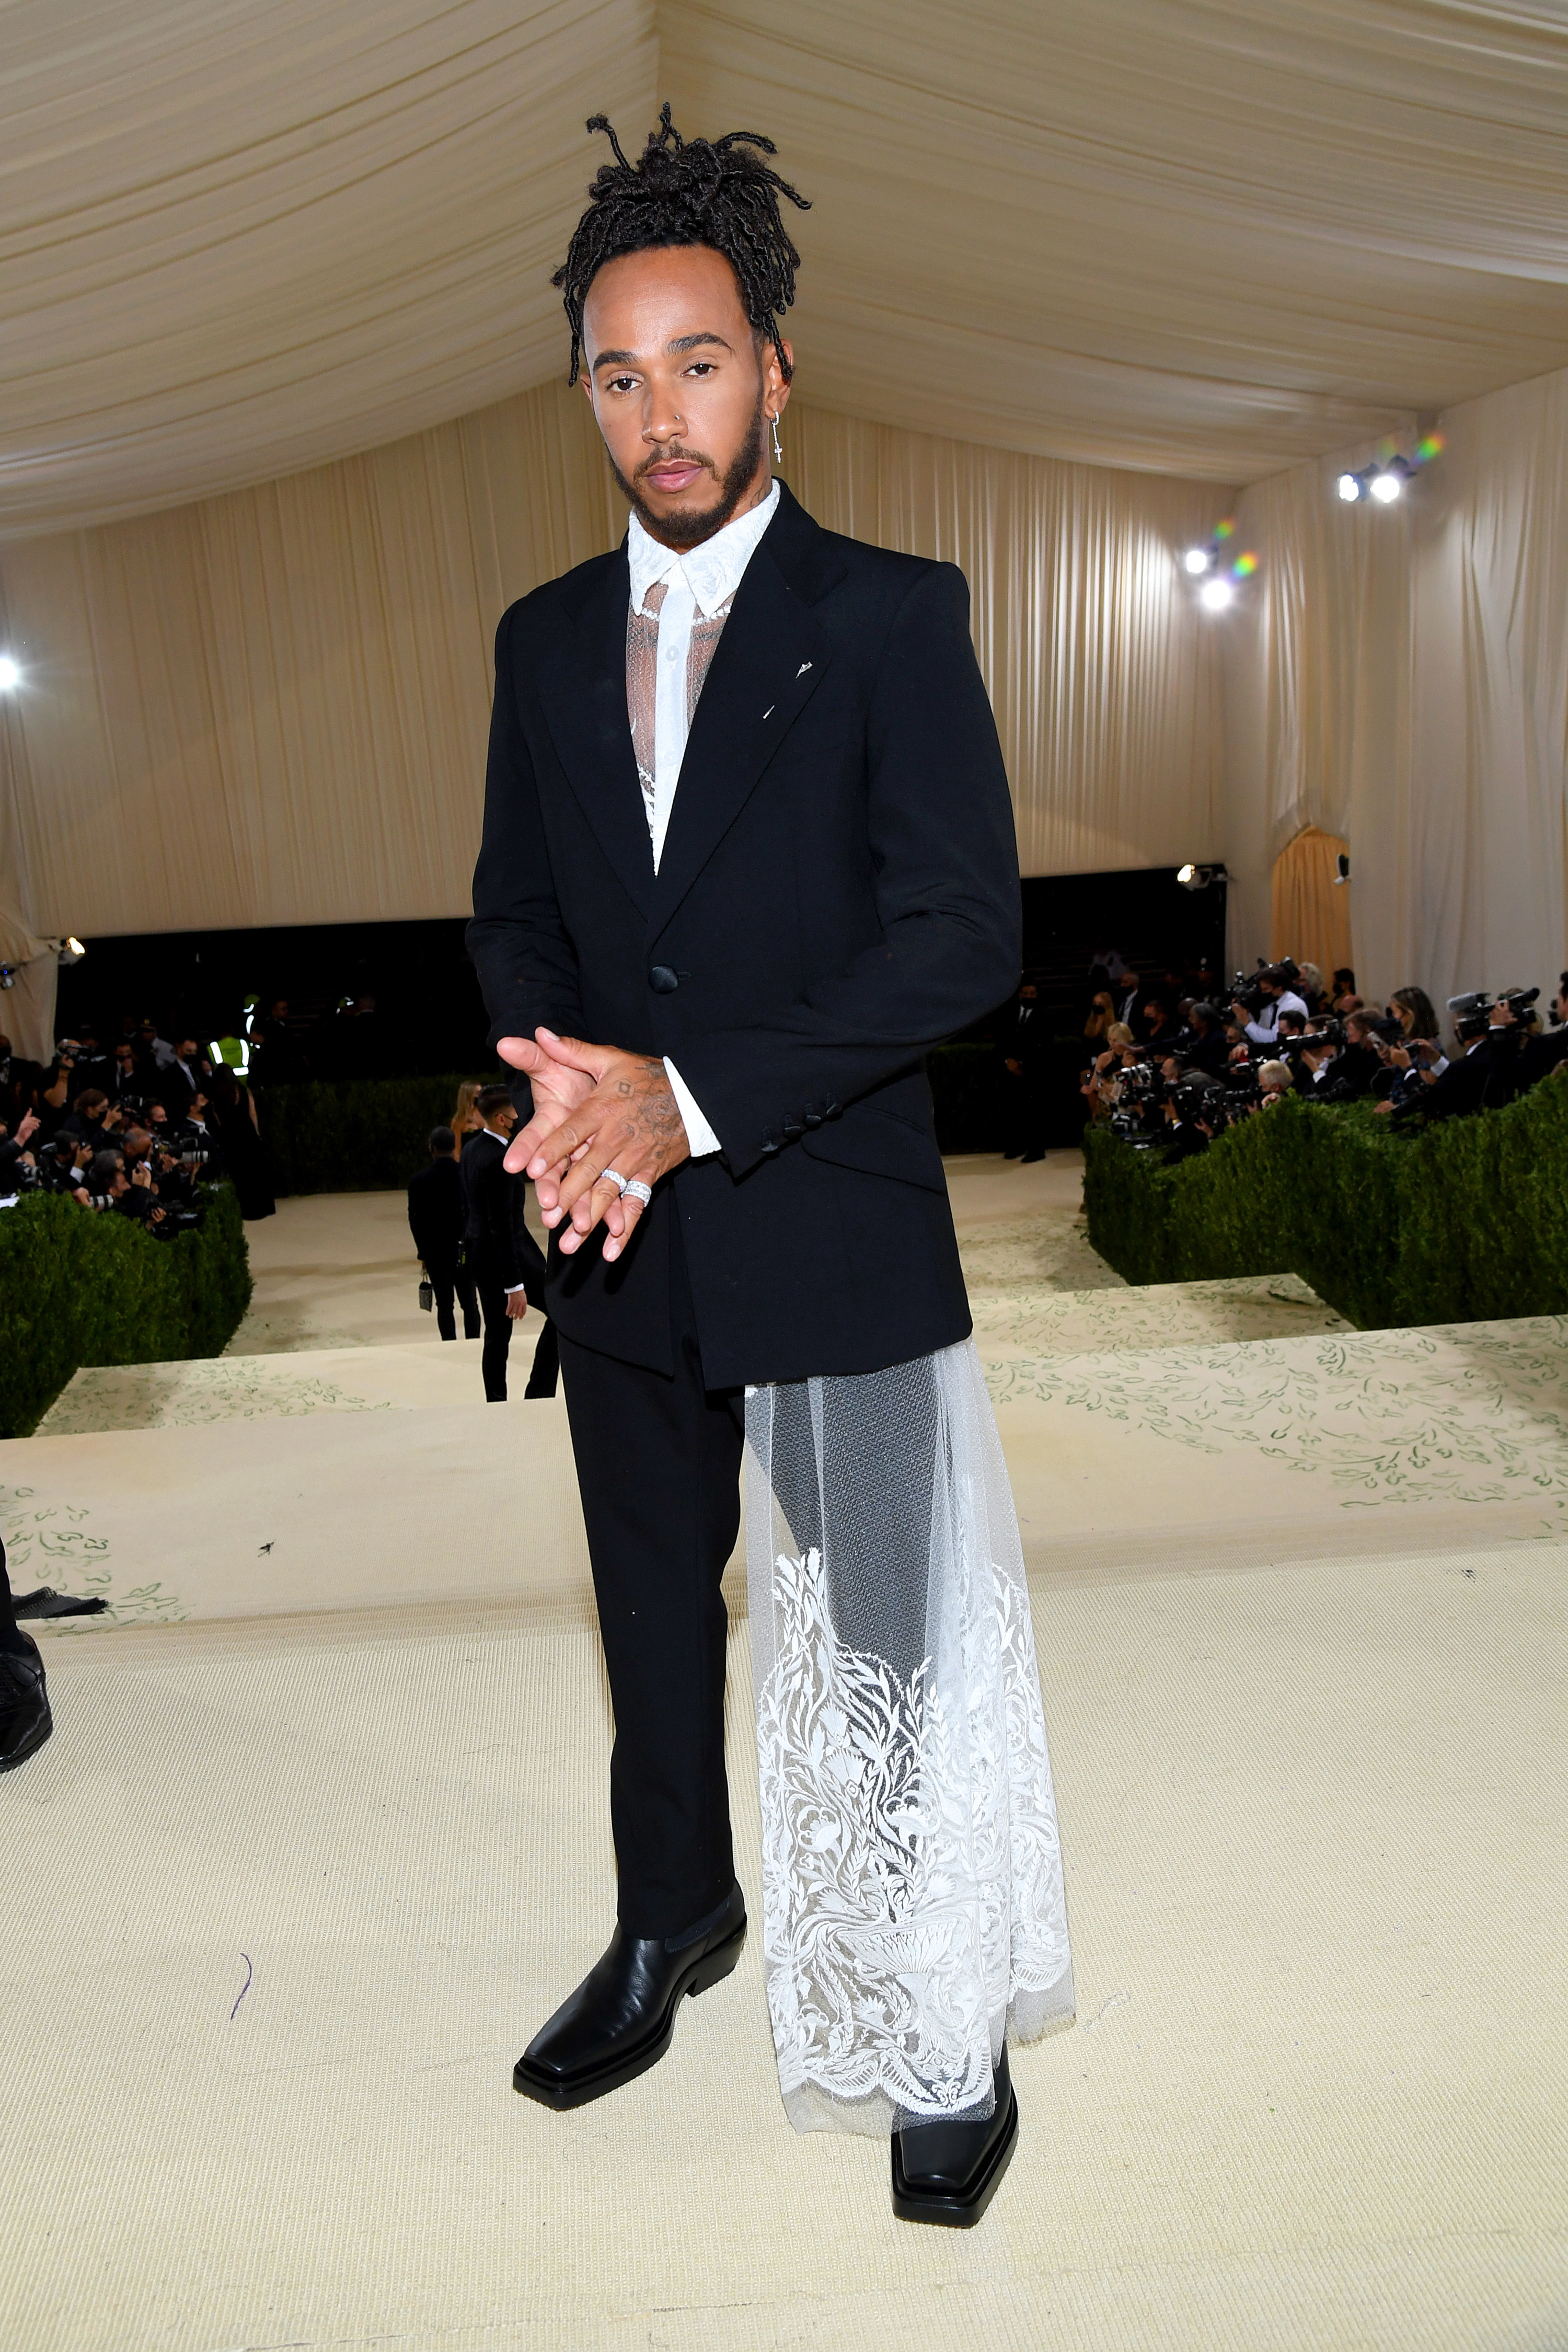 Lewis wearing the outfit at the Met Gala